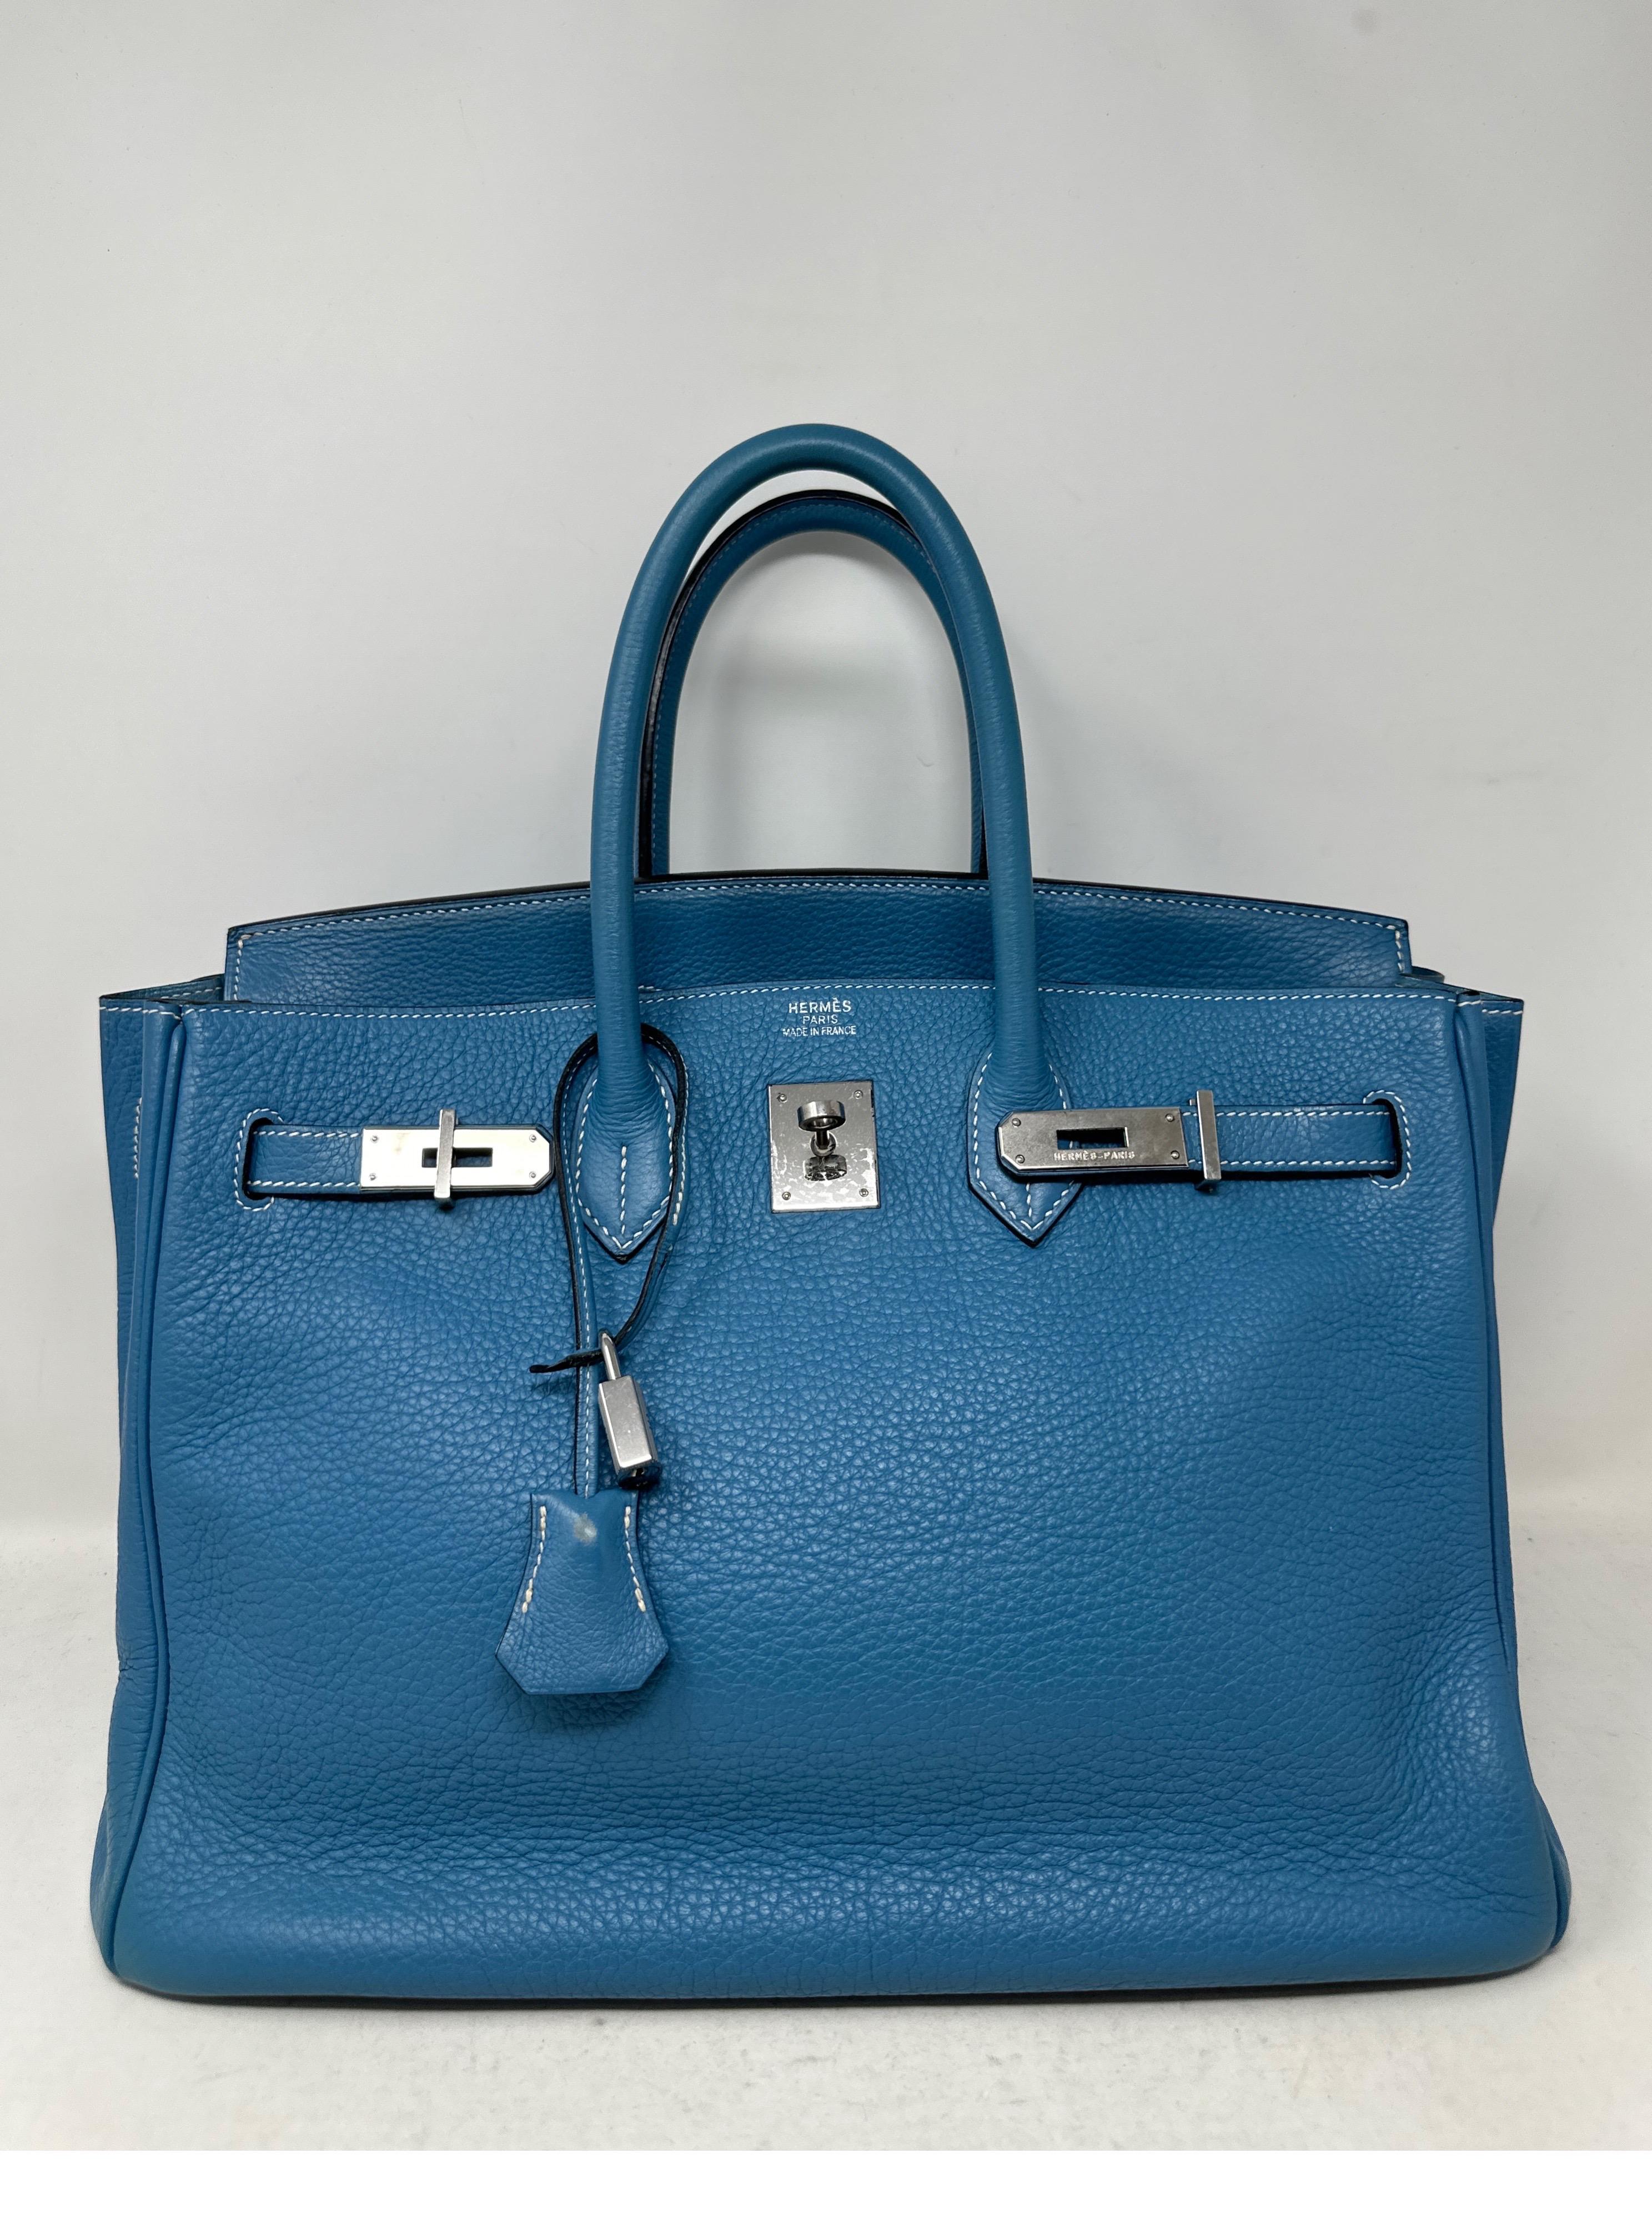 Hermes Blue Jean Birkin 35 Bag. Collector's piece. Sought after color Blue jean. Palladium silver hardware. Good condition. Light wear on corners. Please see photos. Minimal wear. Interior clean. Includes clcohette, lock, keys, and dust bag.